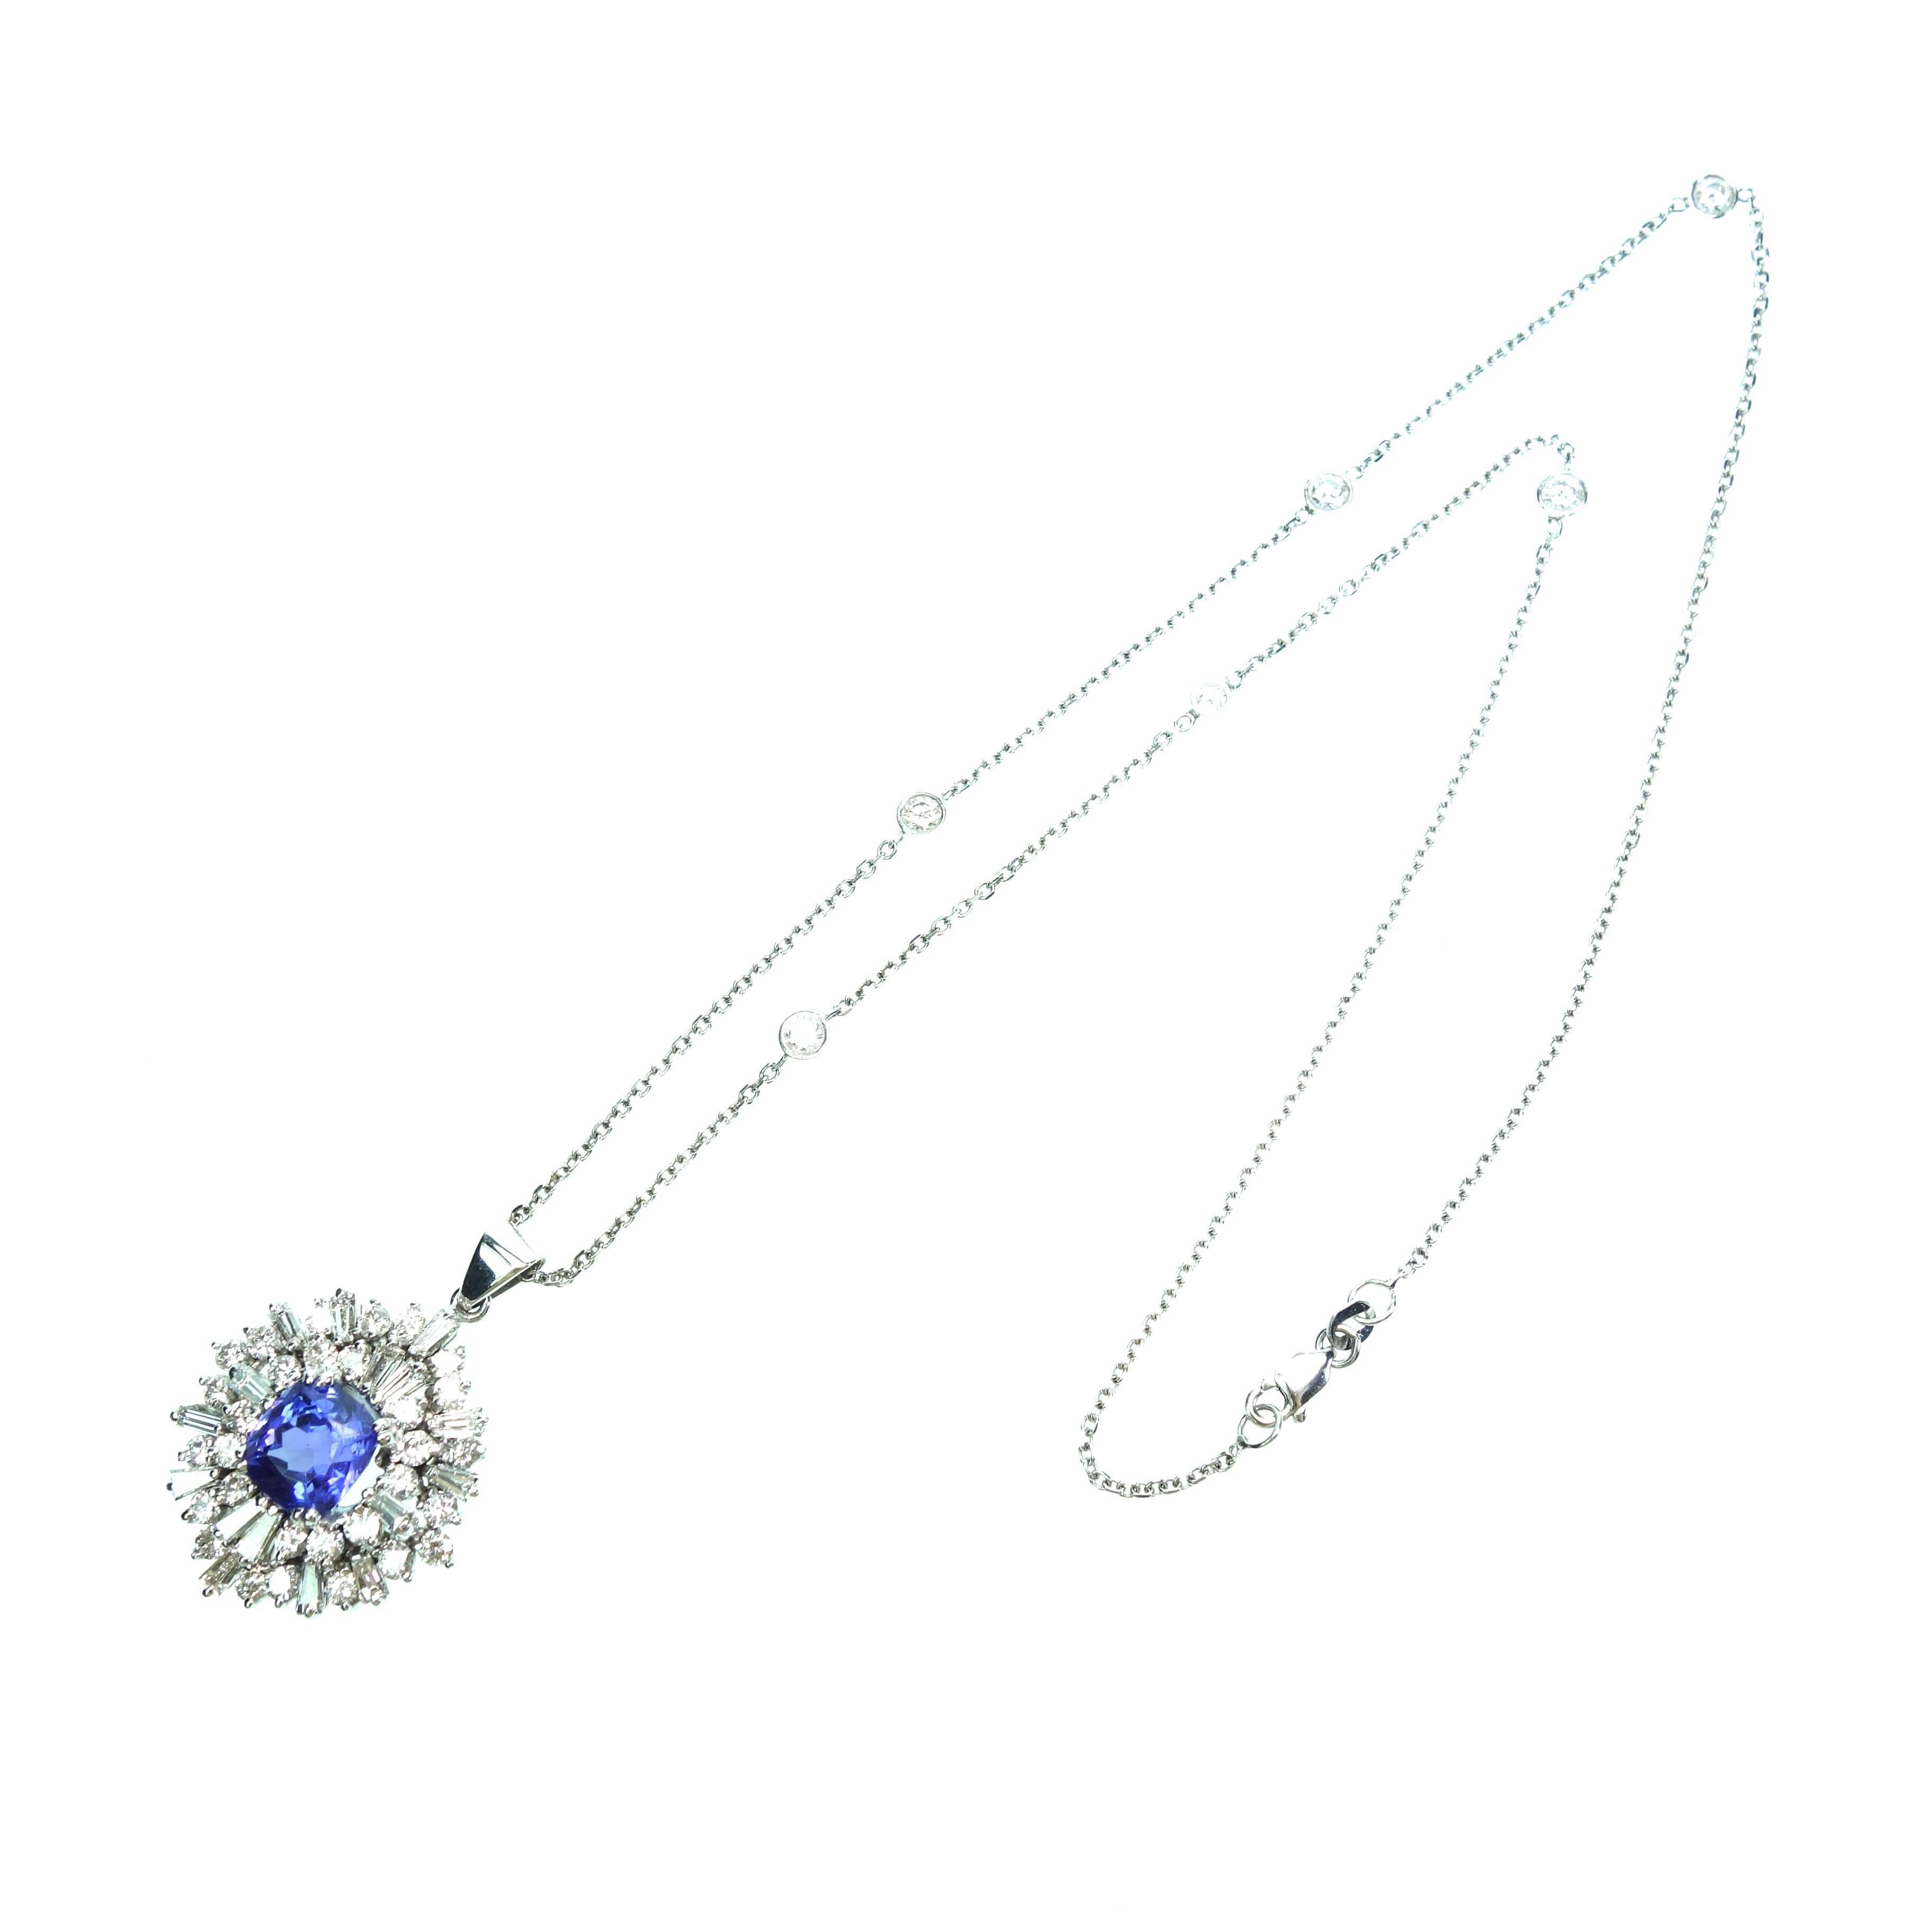 Gorgeous Tanzanite Diamond Gold Pendant Necklace In Excellent Condition For Sale In Agoura Hills, CA